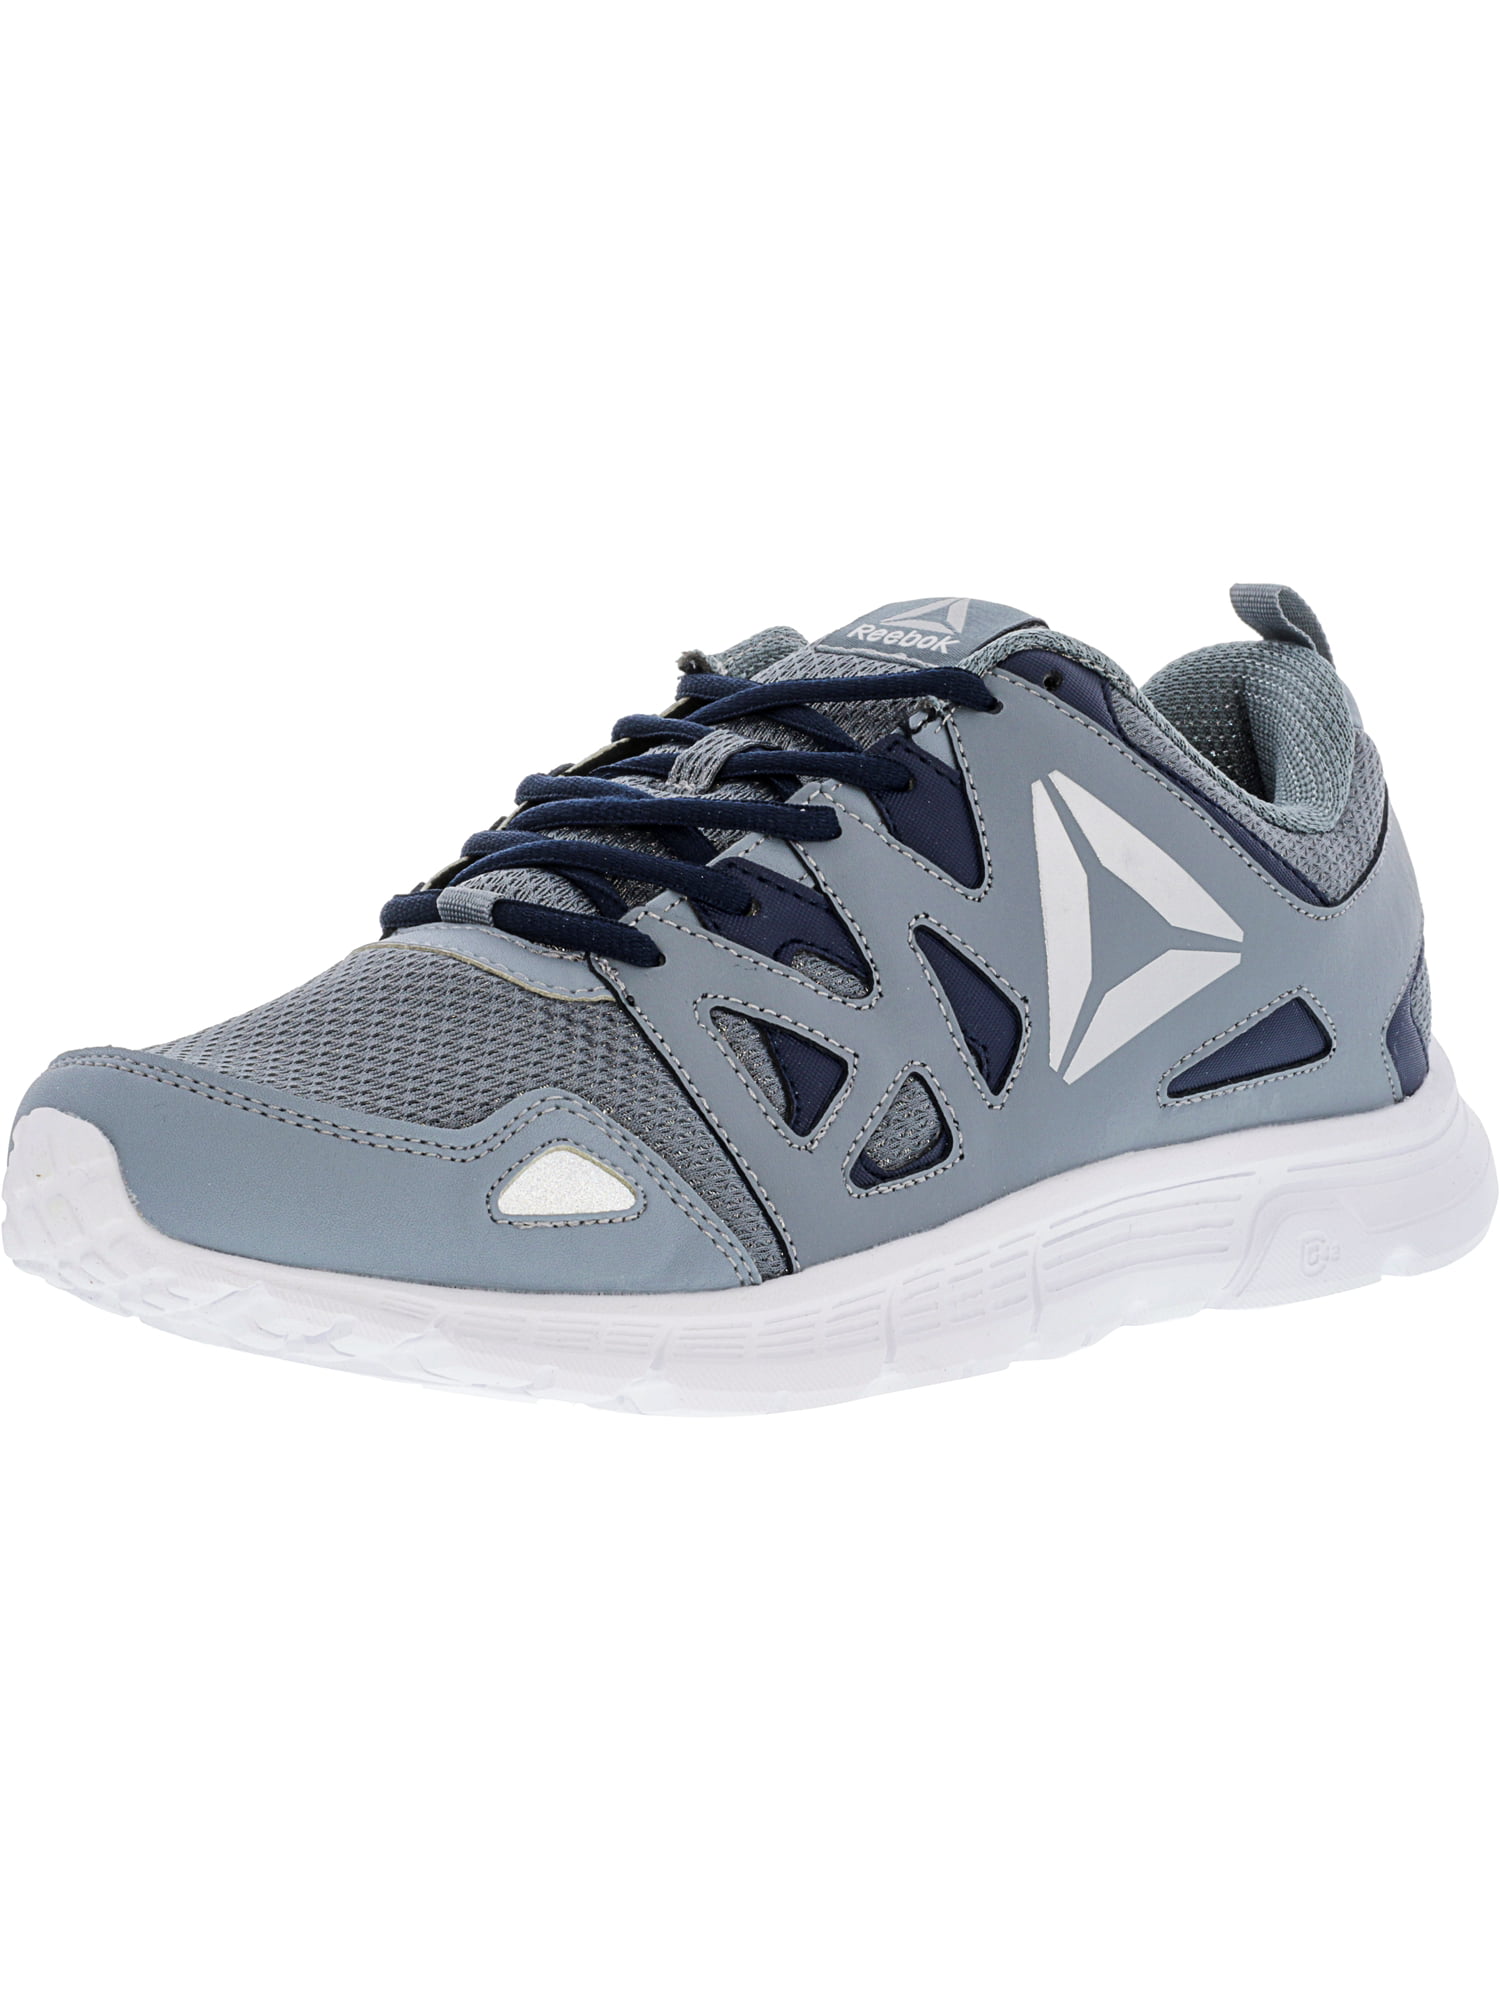 Emerald Grey Ankle-High Running Shoe 